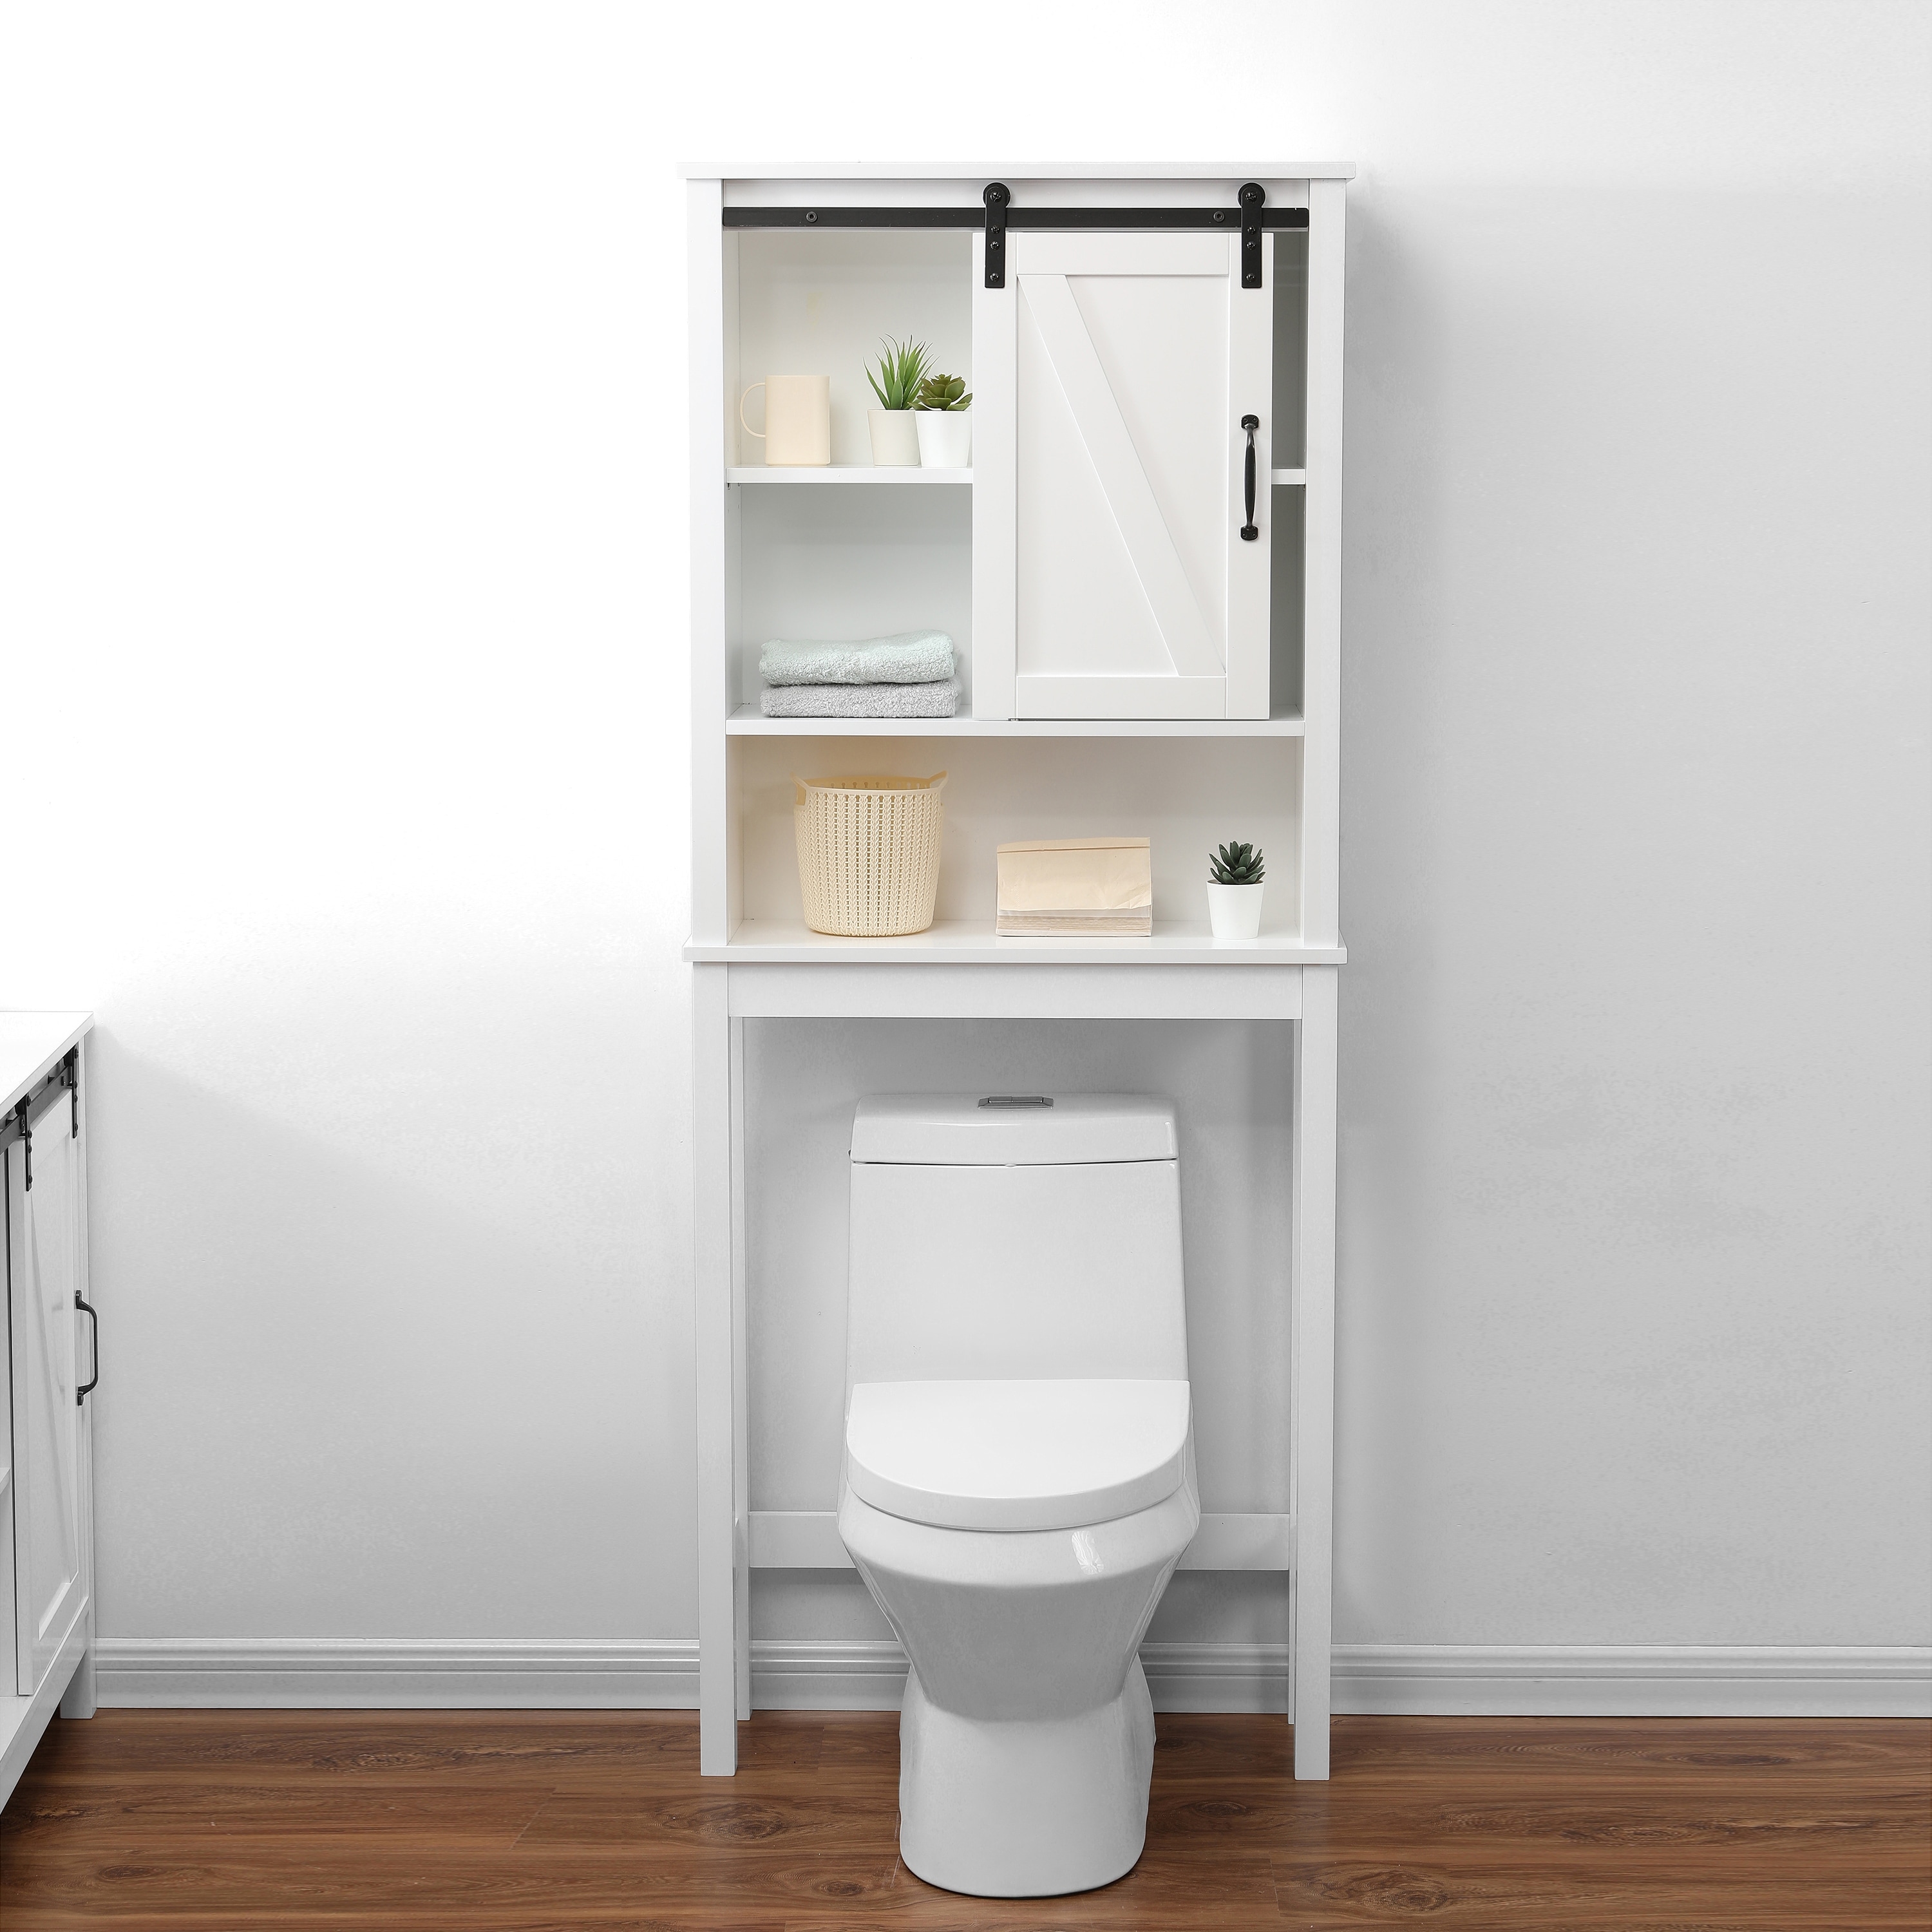 https://ak1.ostkcdn.com/images/products/is/images/direct/104040c77430d2514858fd5ad44d650300558b5d/Farmhouse-White-MDF-Wood-Over-the-Toilet-Space-Saver-Cabinet.jpg